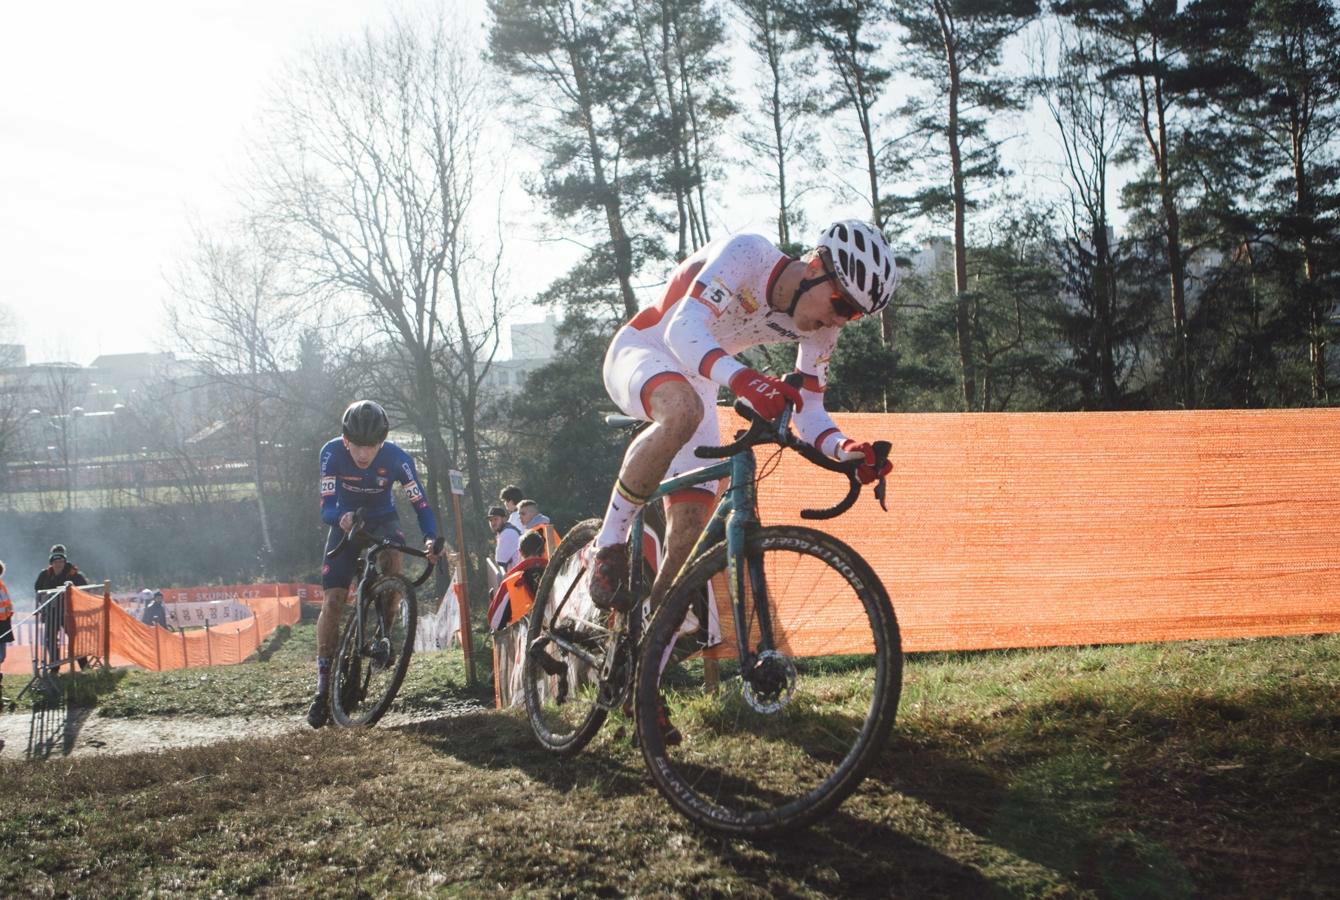 Revised calendar of the 2020 - 2021 UCI Cyclo-cross World Cup to start on 1 November in Overijse, Belgium